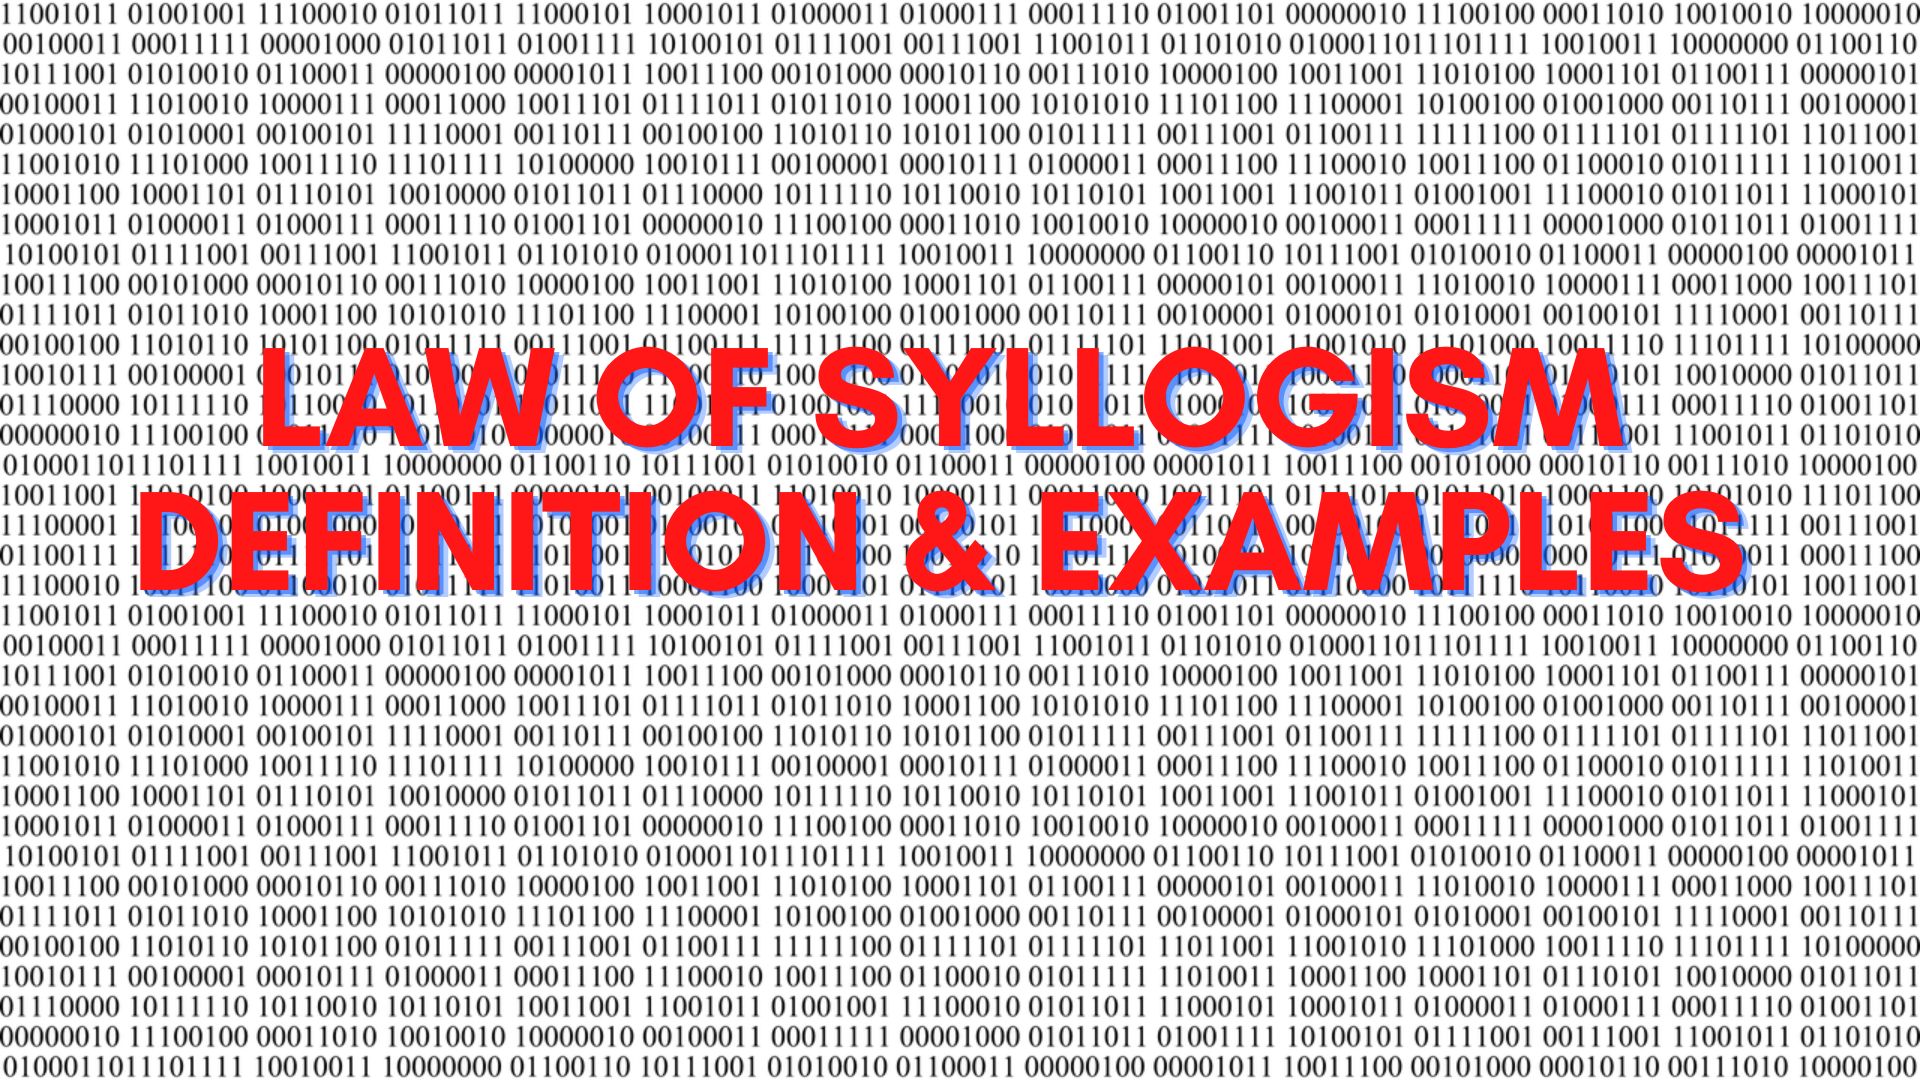 Law Of Syllogism - What Is It And Its Main Applications?